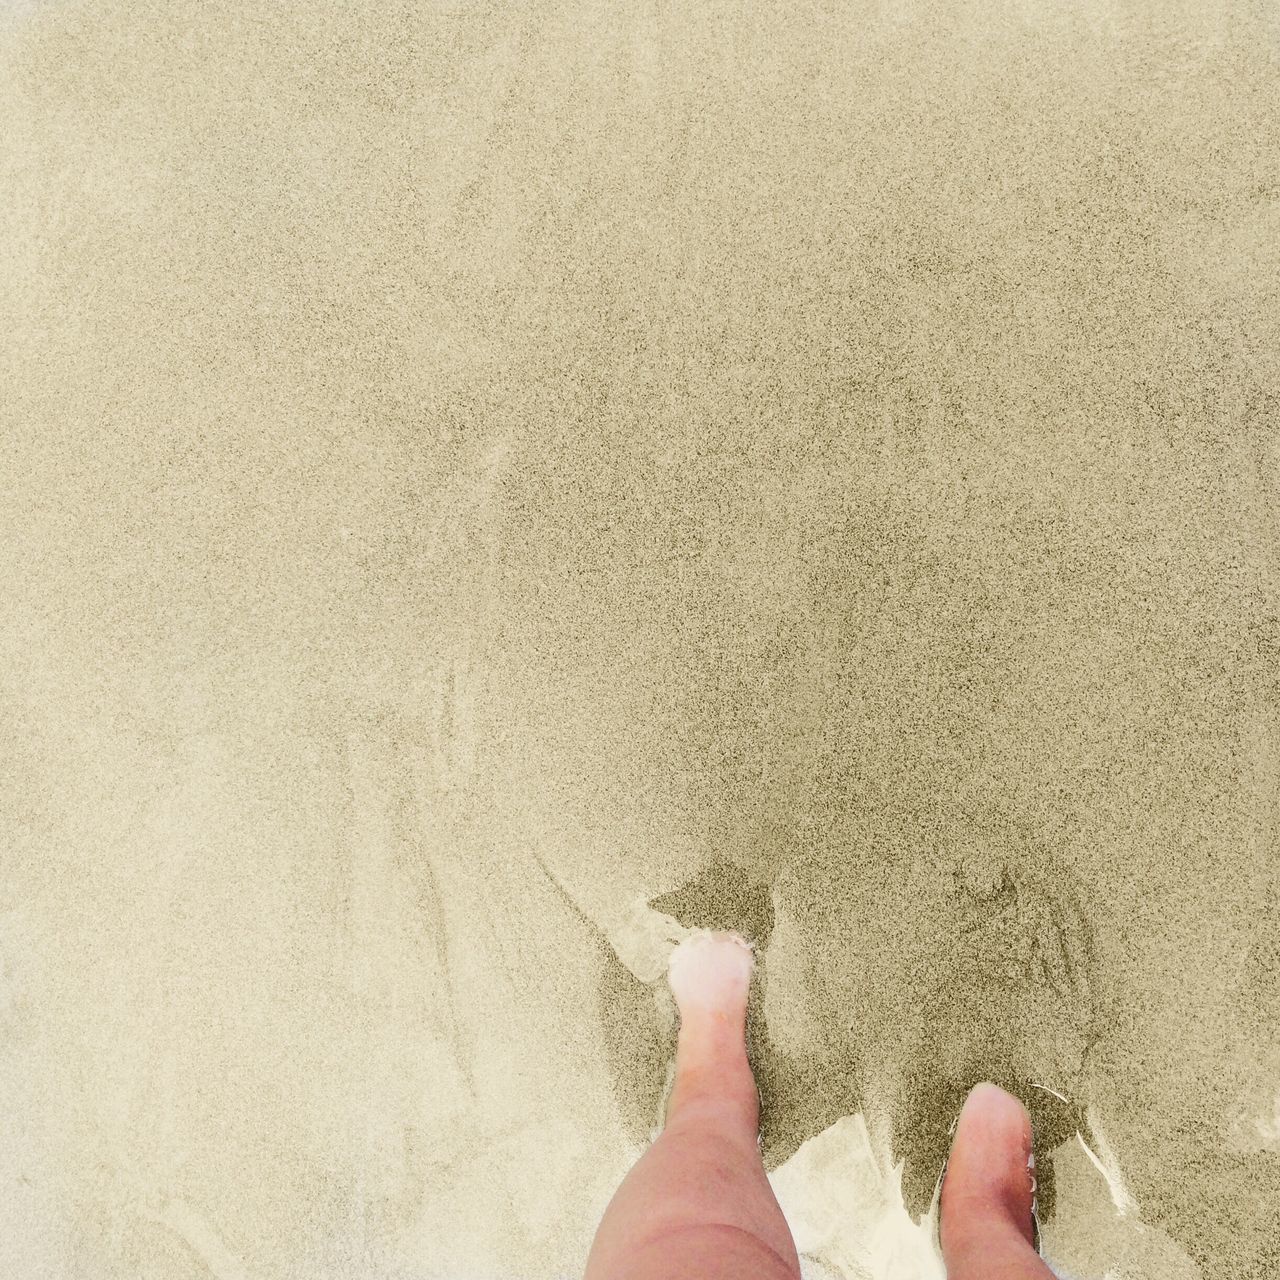 low section, person, sand, beach, standing, high angle view, vacations, human foot, personal perspective, day, nature, outdoors, summer, shore